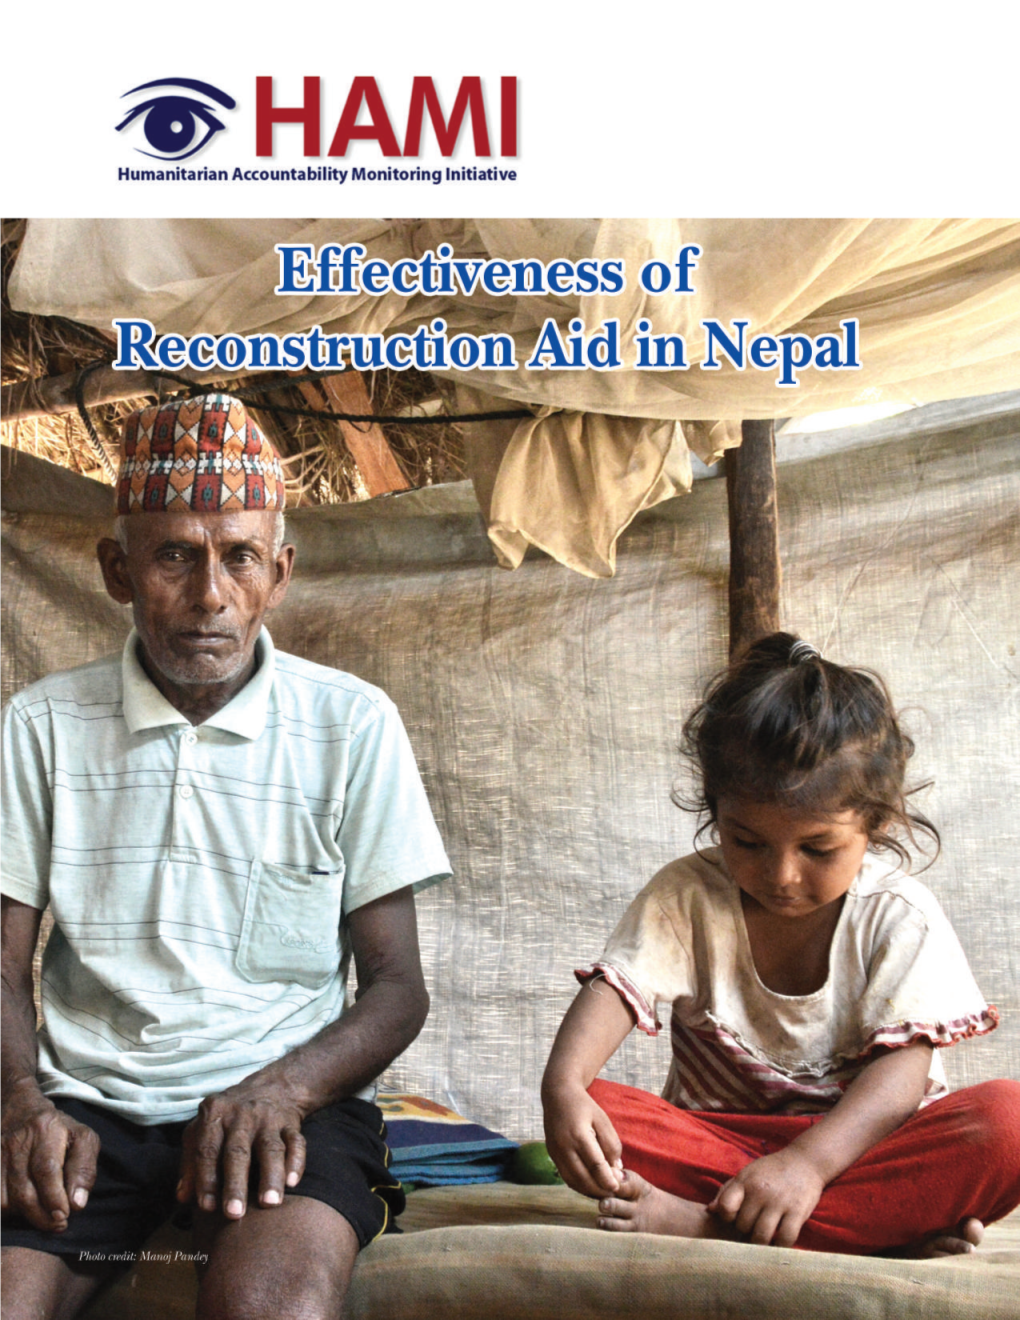 Effectiveness of Reconstruction in Nepal